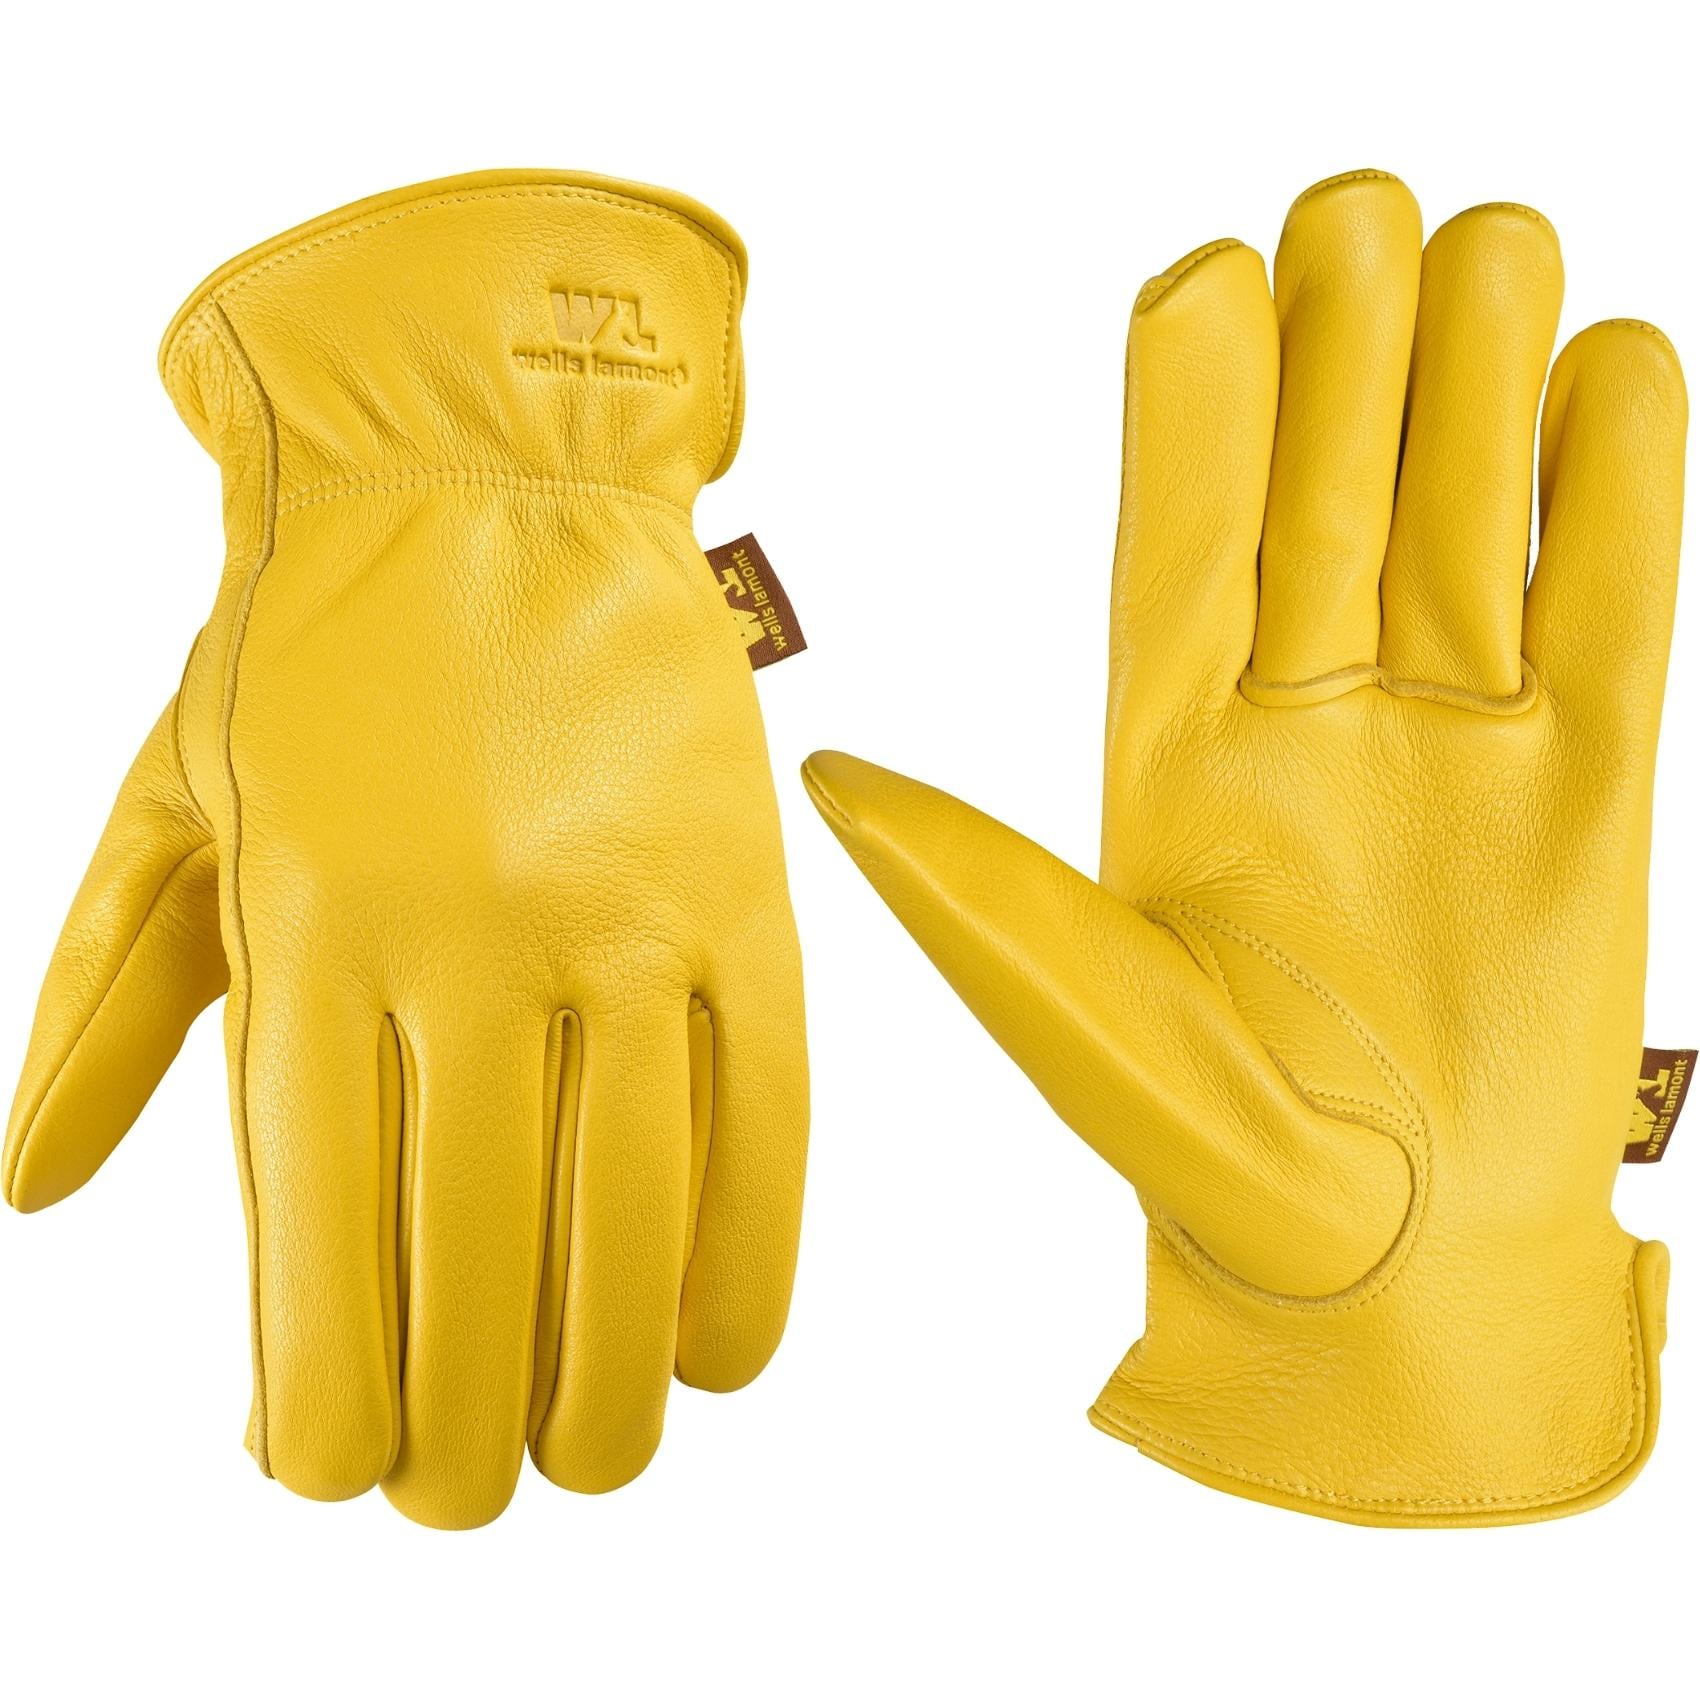 Wells Lamont X-large Yellow Leather Gloves, (1-Pair) in the Work